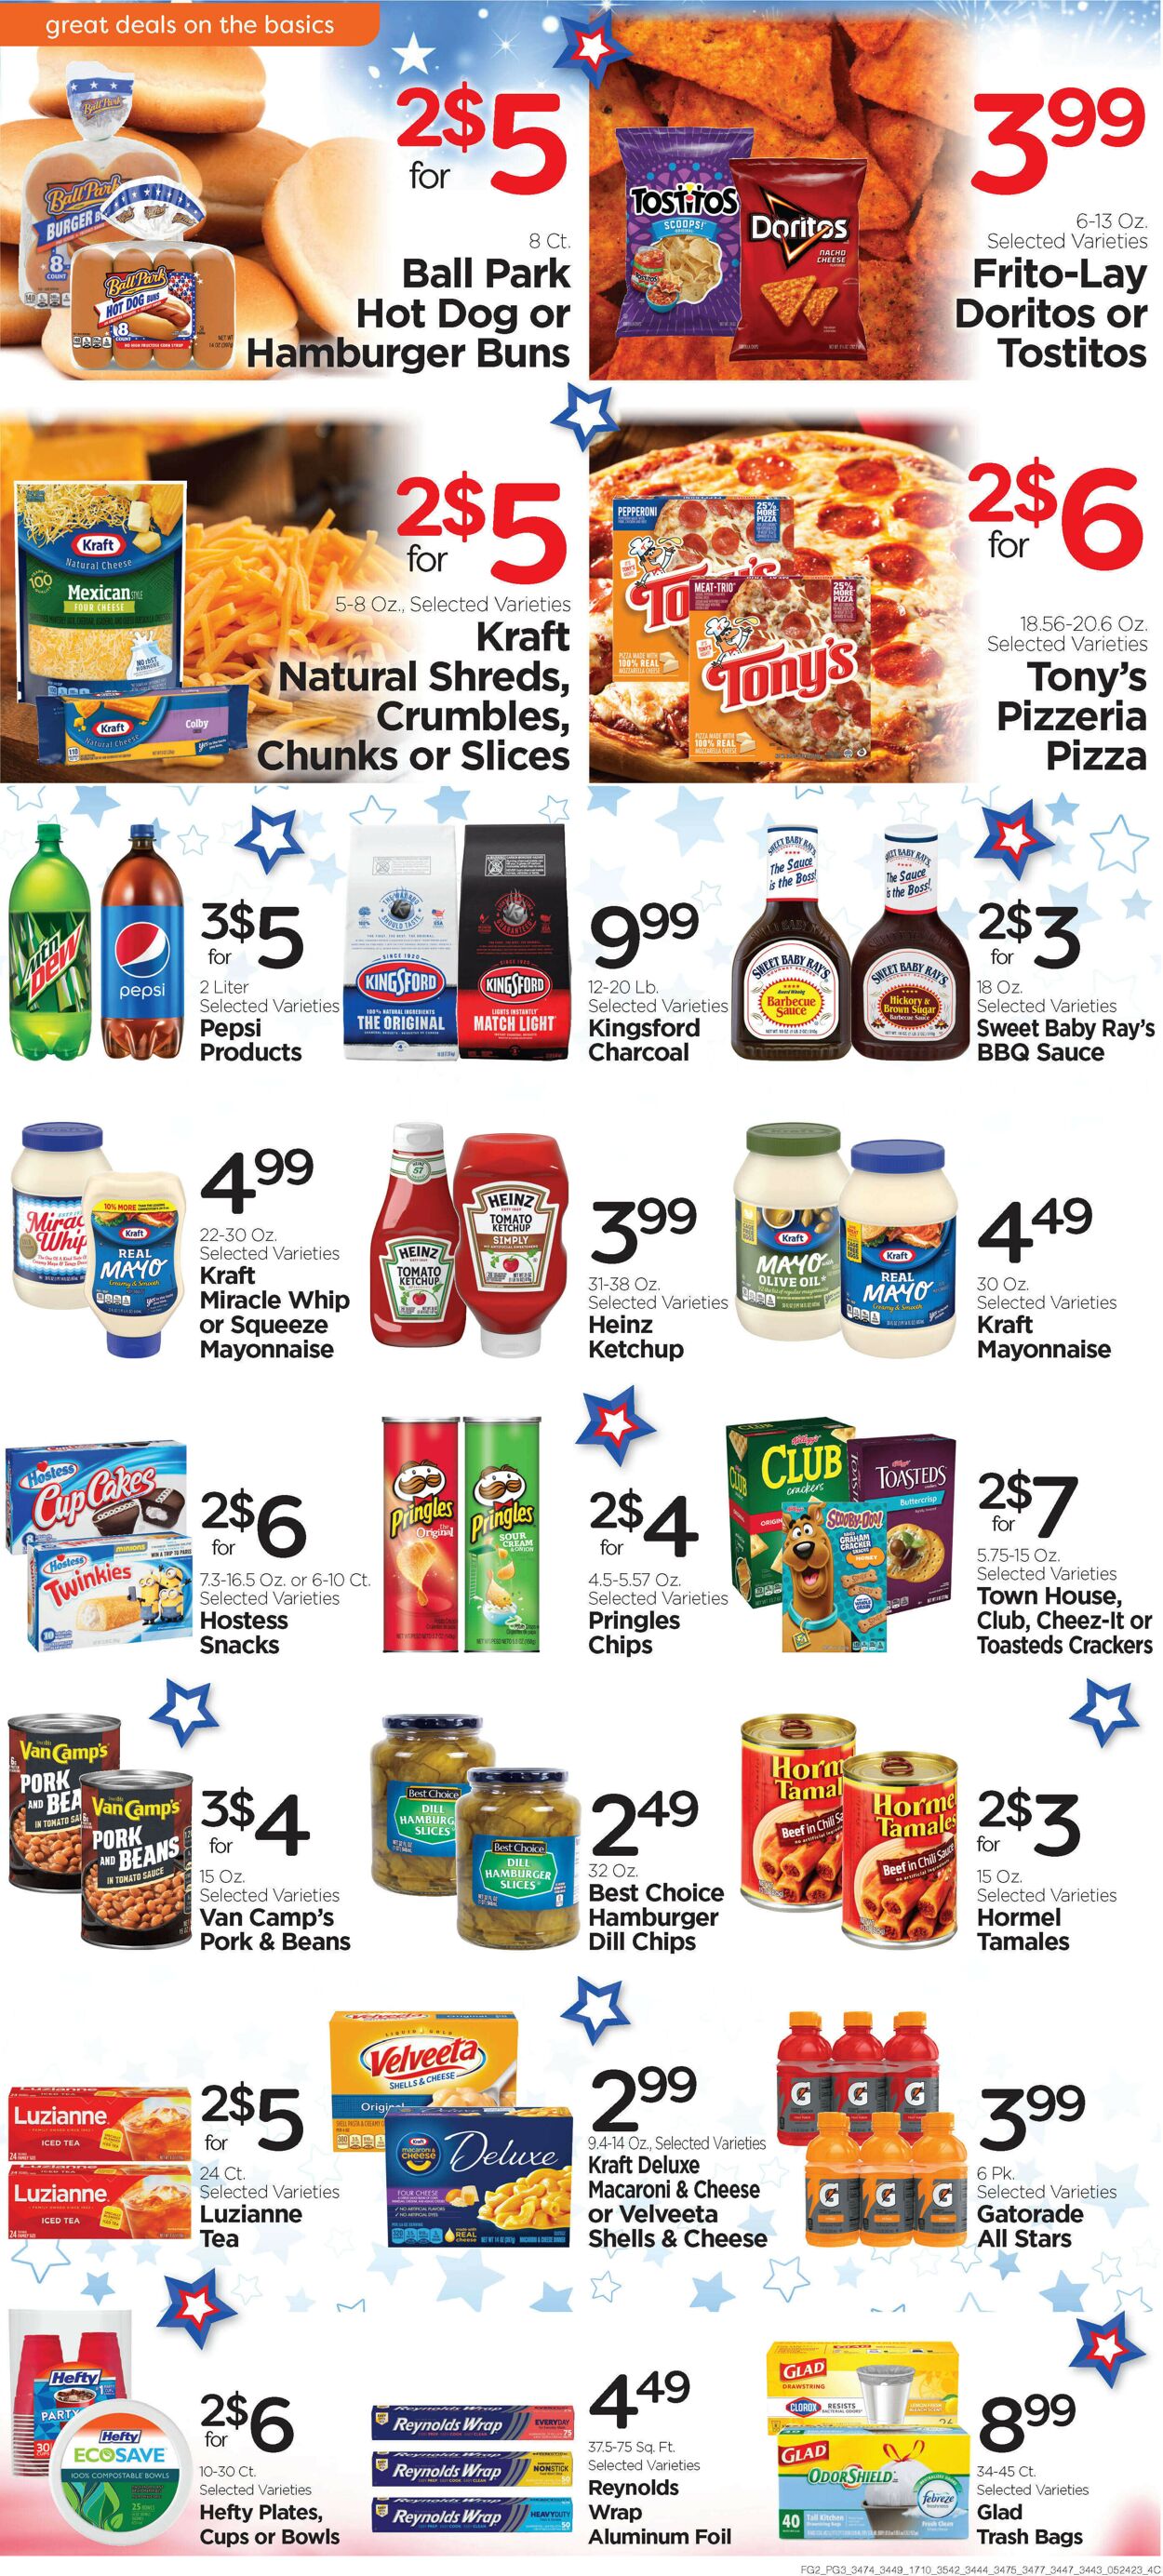 Catalogue Edwards Food Giant from 05/24/2023